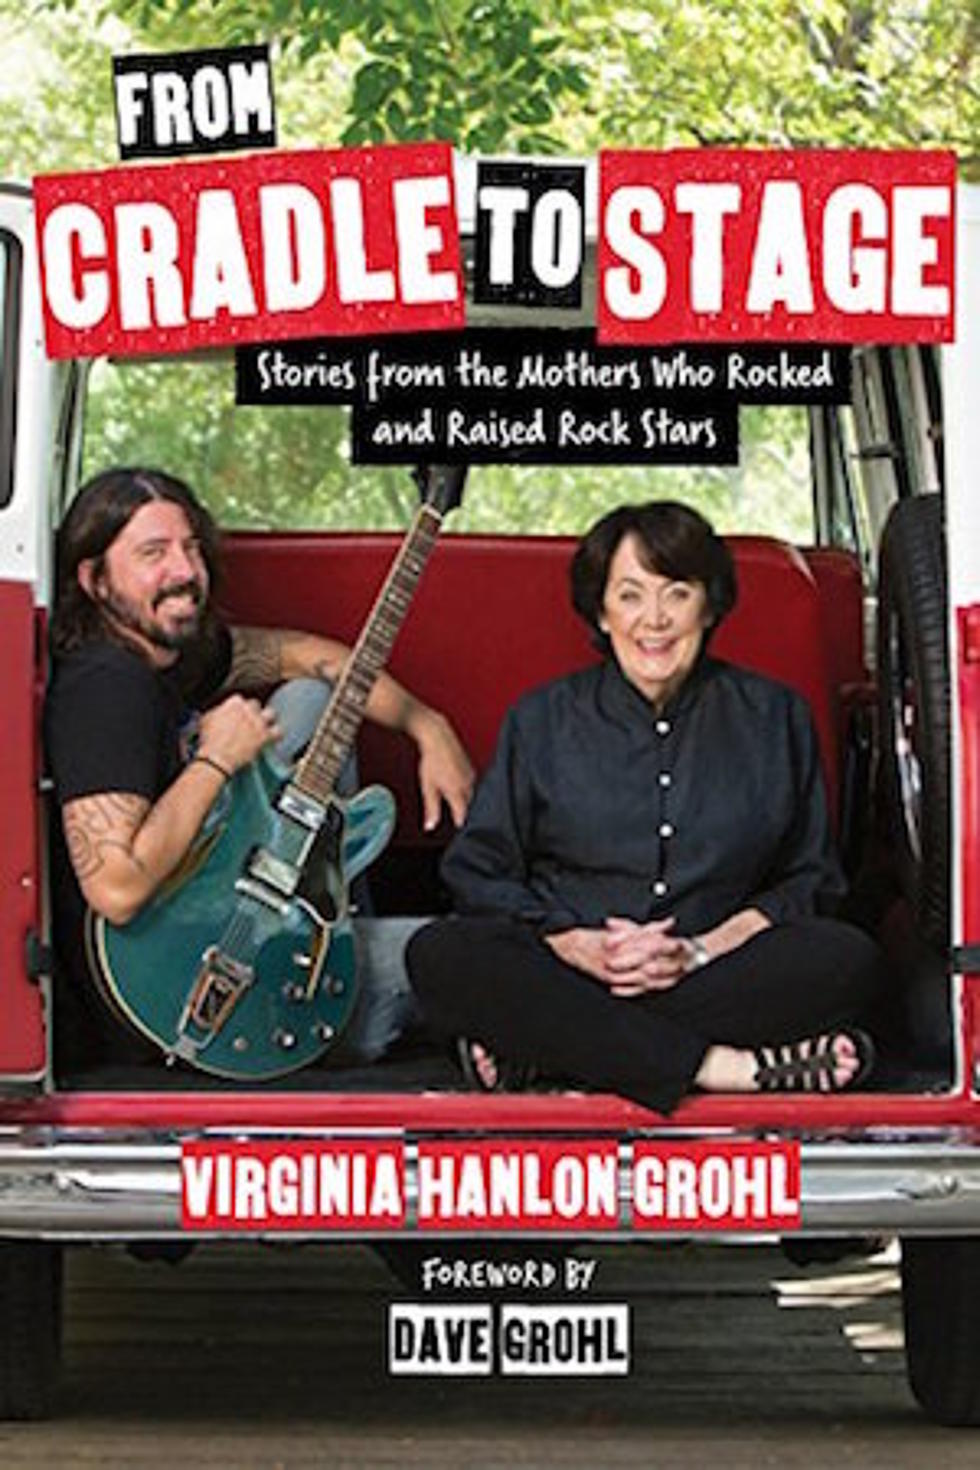 Dave Grohl&#8217;s Mother to Release Stories From Rock Star Moms in &#8216;From Cradle to Stage&#8217;